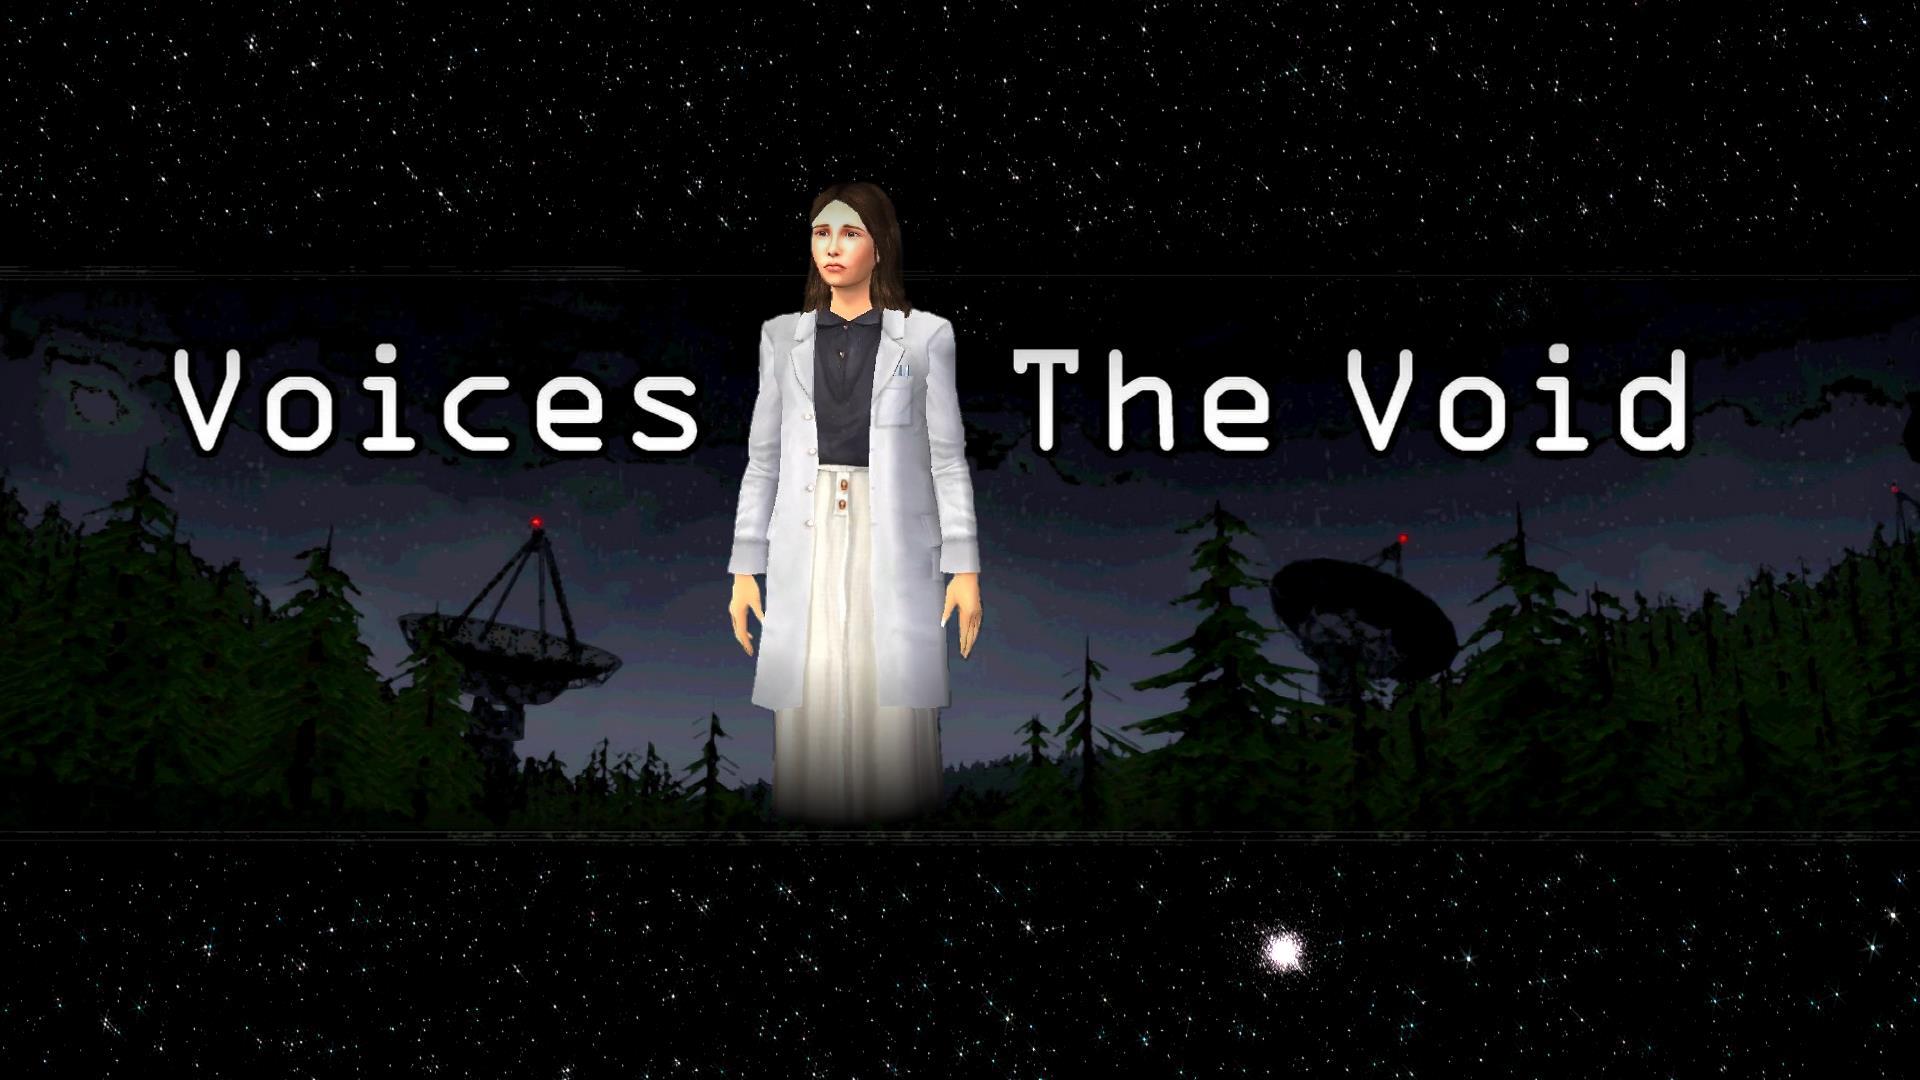 Voices of the Void игра. Voices of the Void моды. Сны Voices of the Void. Voices of the Void русский язык.